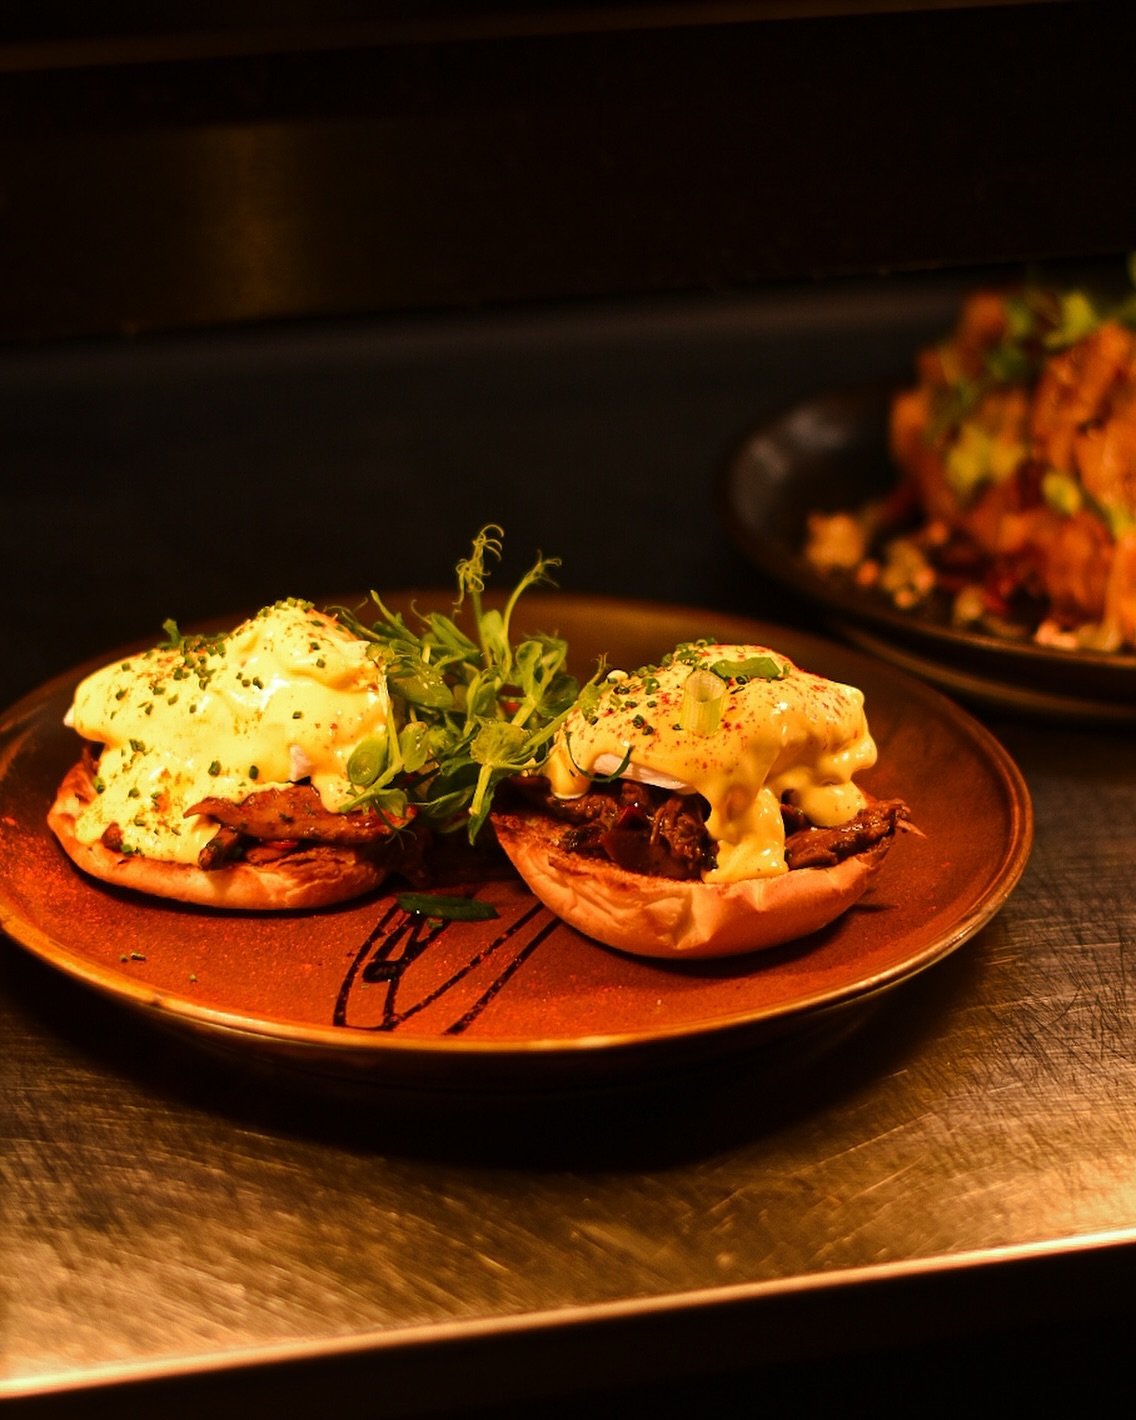 Bank Holiday Brunch Sorted! 🌤️

No need to change your plans - We&rsquo;re open as usual all Bank Holiday weekend, serving up delicious treats from our restaurant, butchery and farm shop.

Our Duck Eggs Benny is a weekend special you won&rsquo;t wan